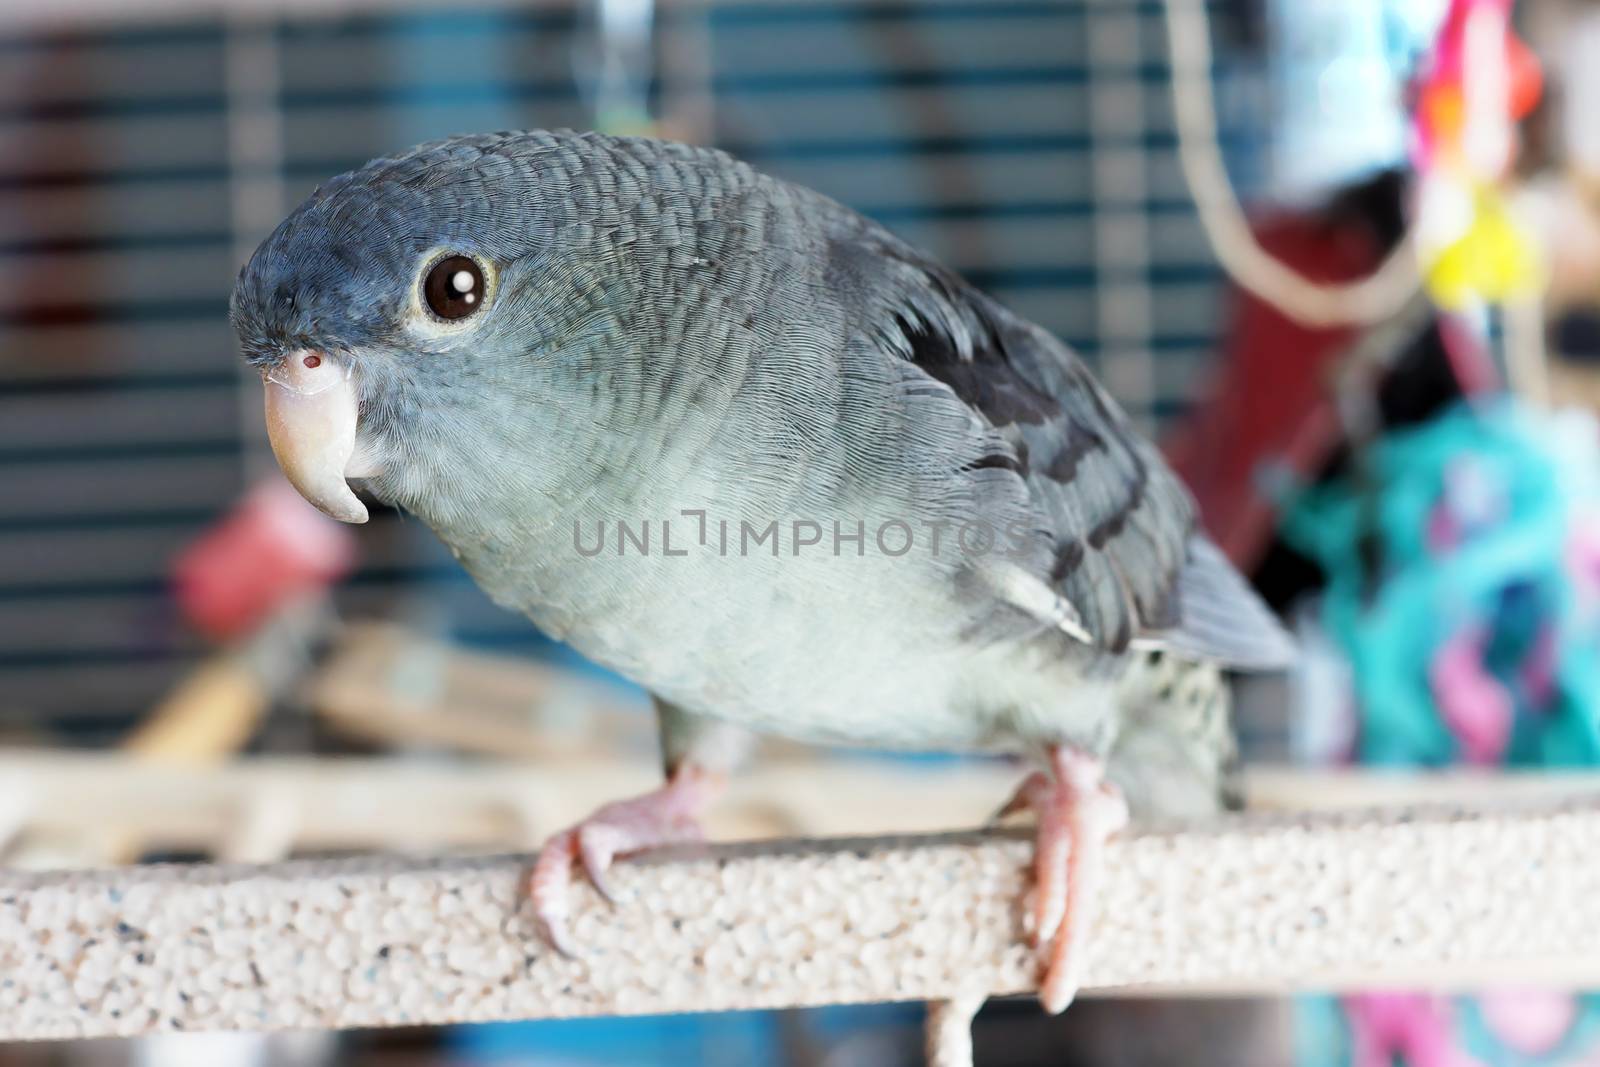 Lineolated or barred parakeet, mauve color, coming out of its cage